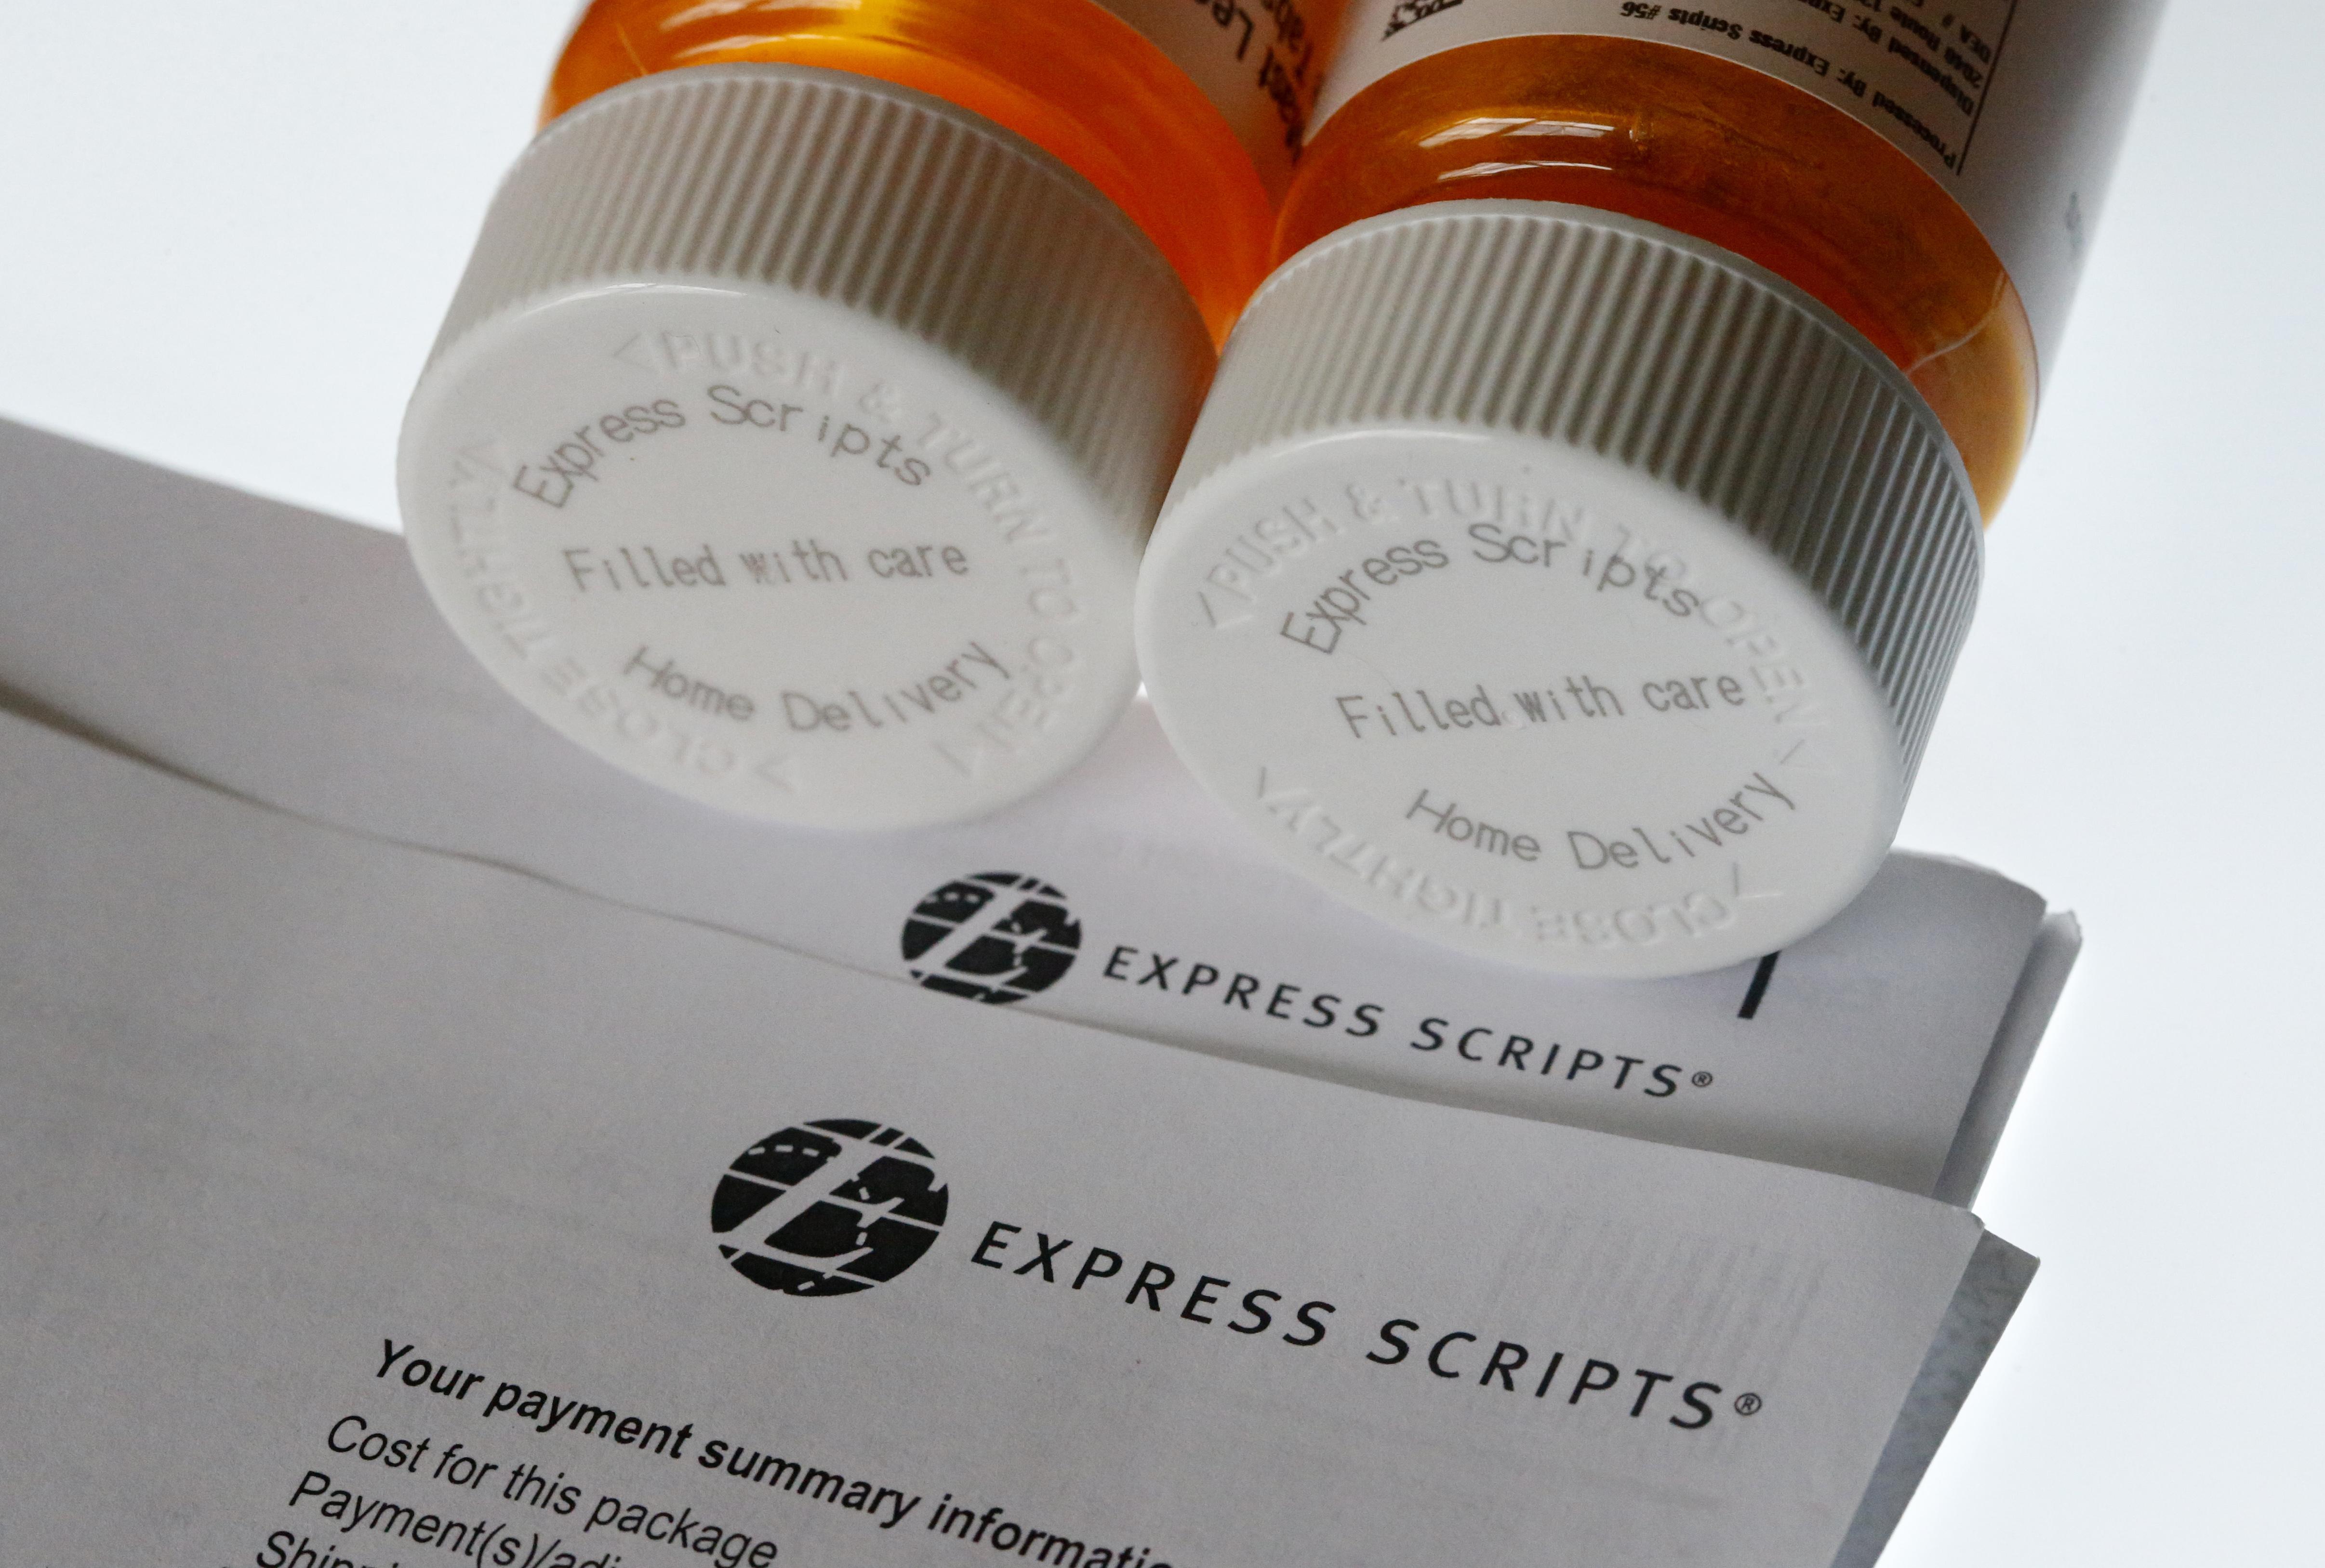 Express Scripts to buy Medical Gatekeeper for 3.6 billion The